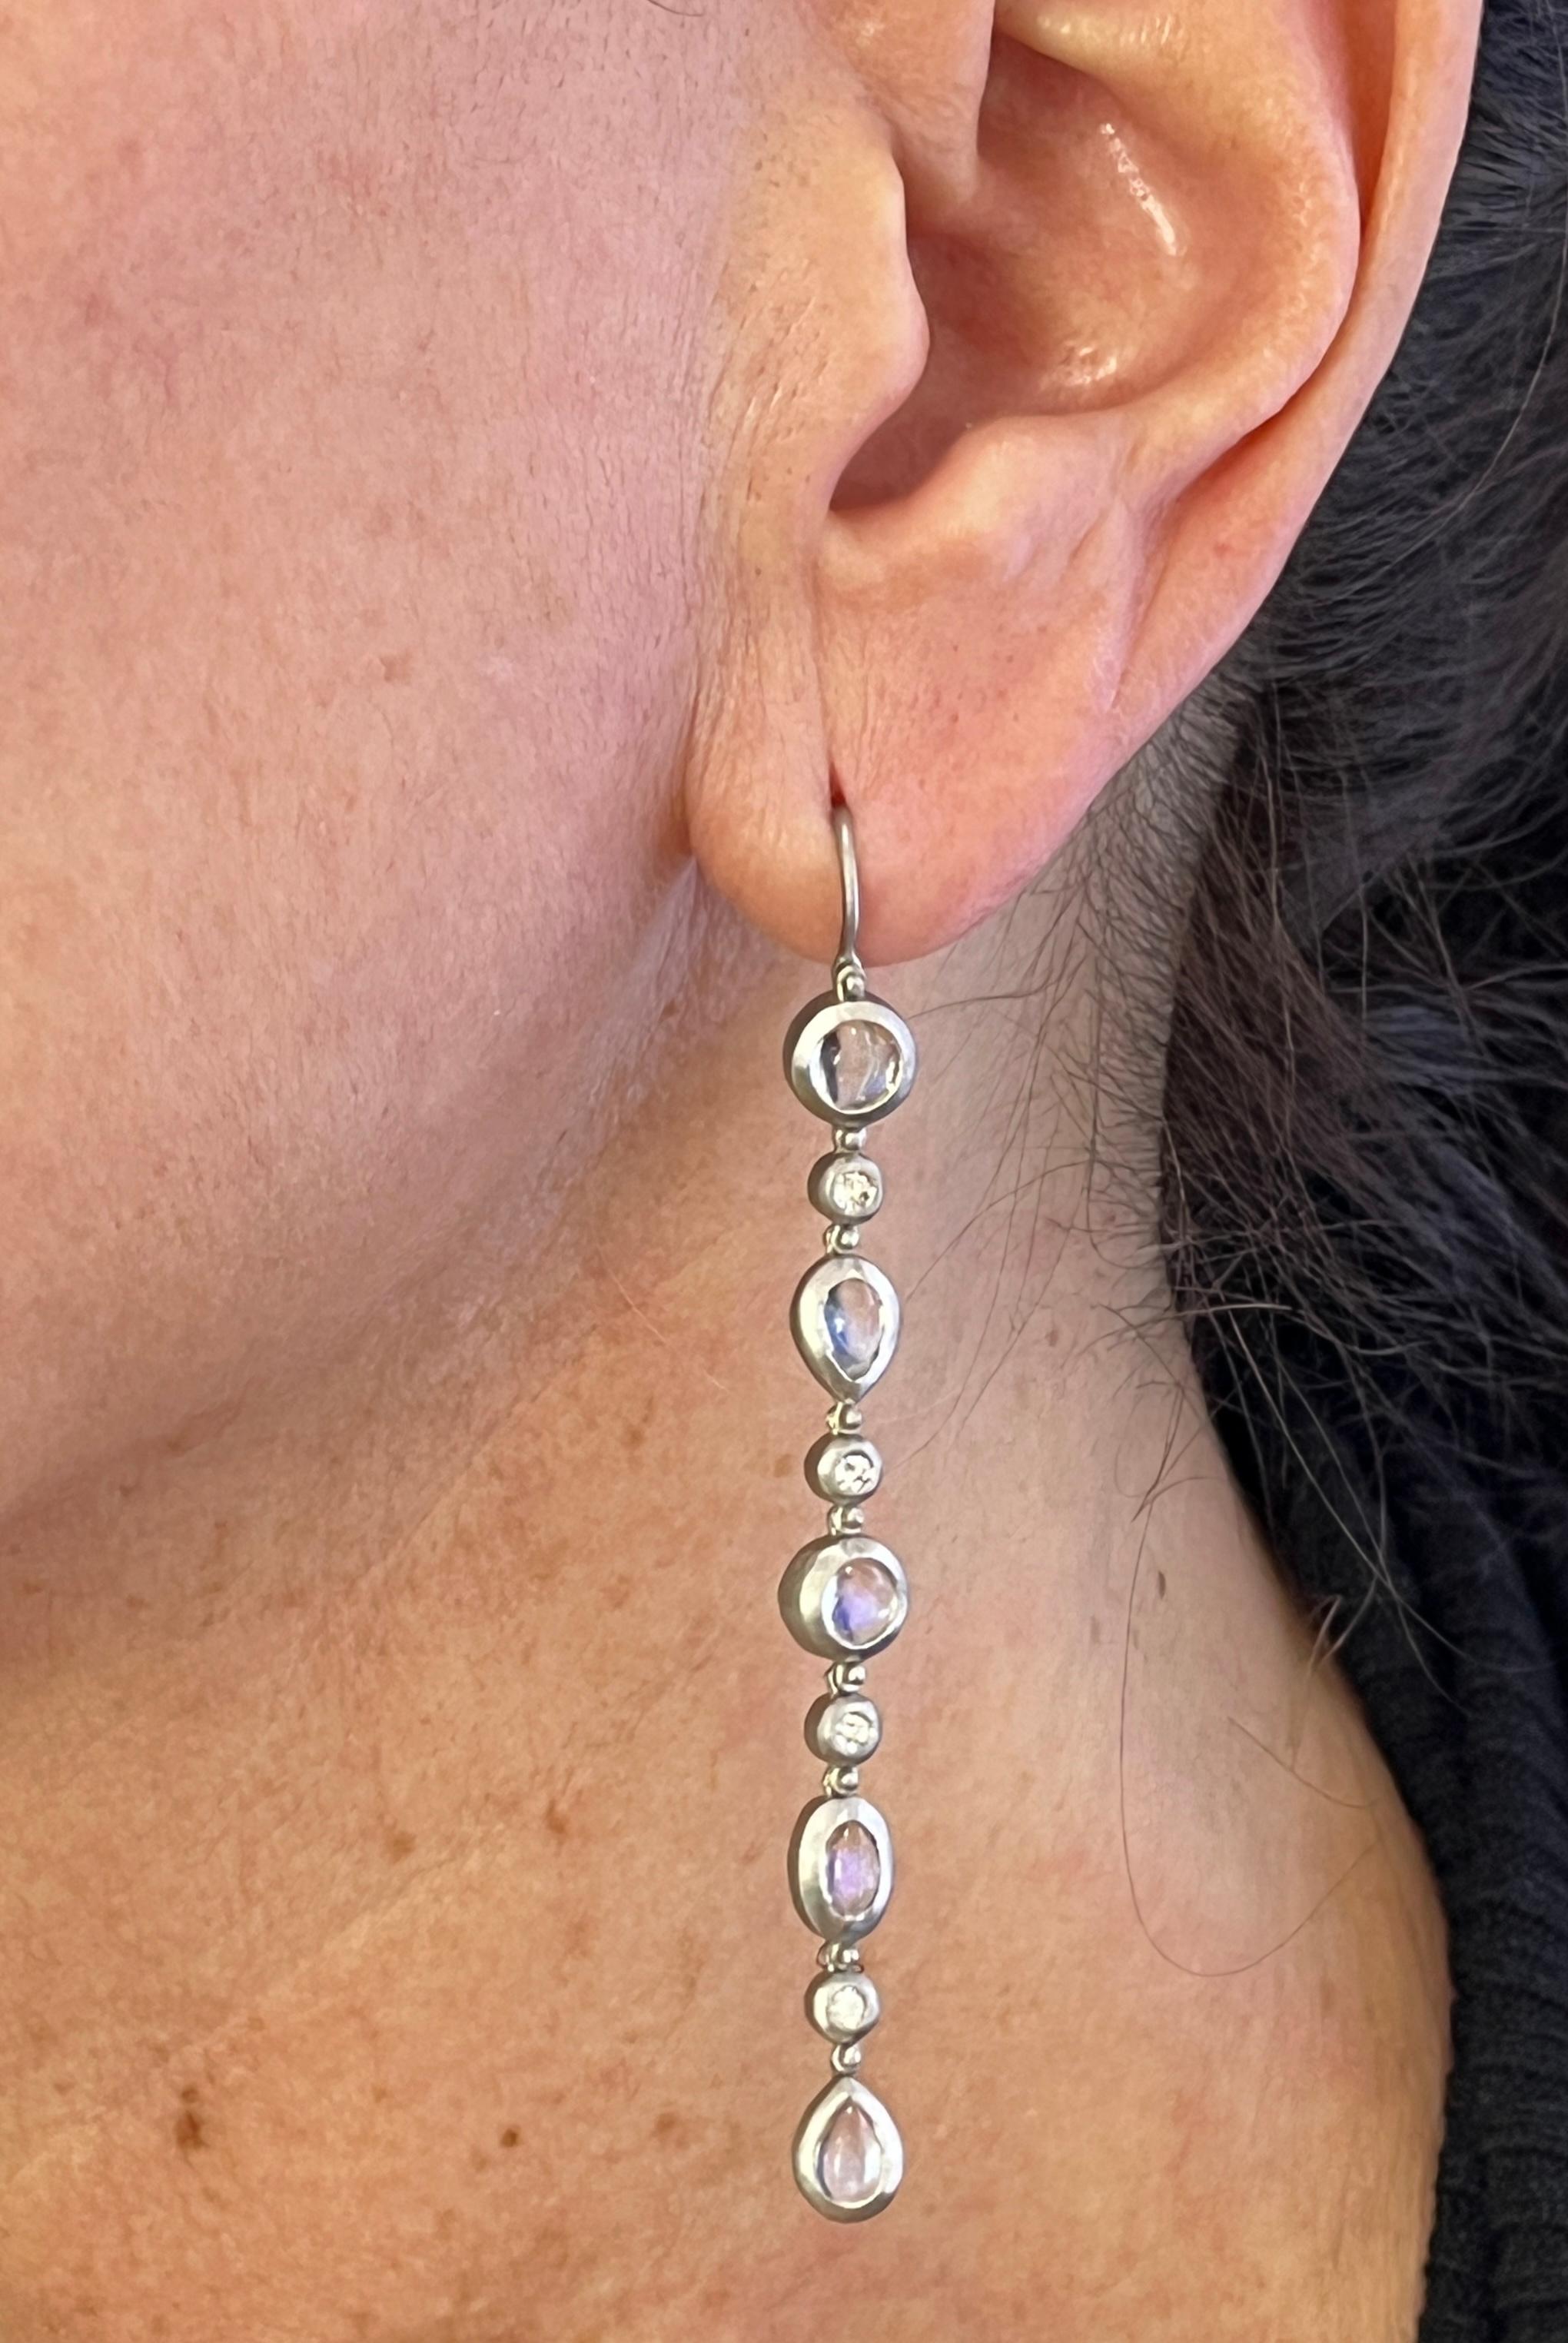 Faye Kim's Platinum Diamond Ceylon Moonstone Line Earrings are beautifully crafted and showcase spectacular round, oval and pear-shape moonstones separated by sparkling round white diamonds. Perfect for every occasion!

Moonstones 5 tcw
Diamonds .25